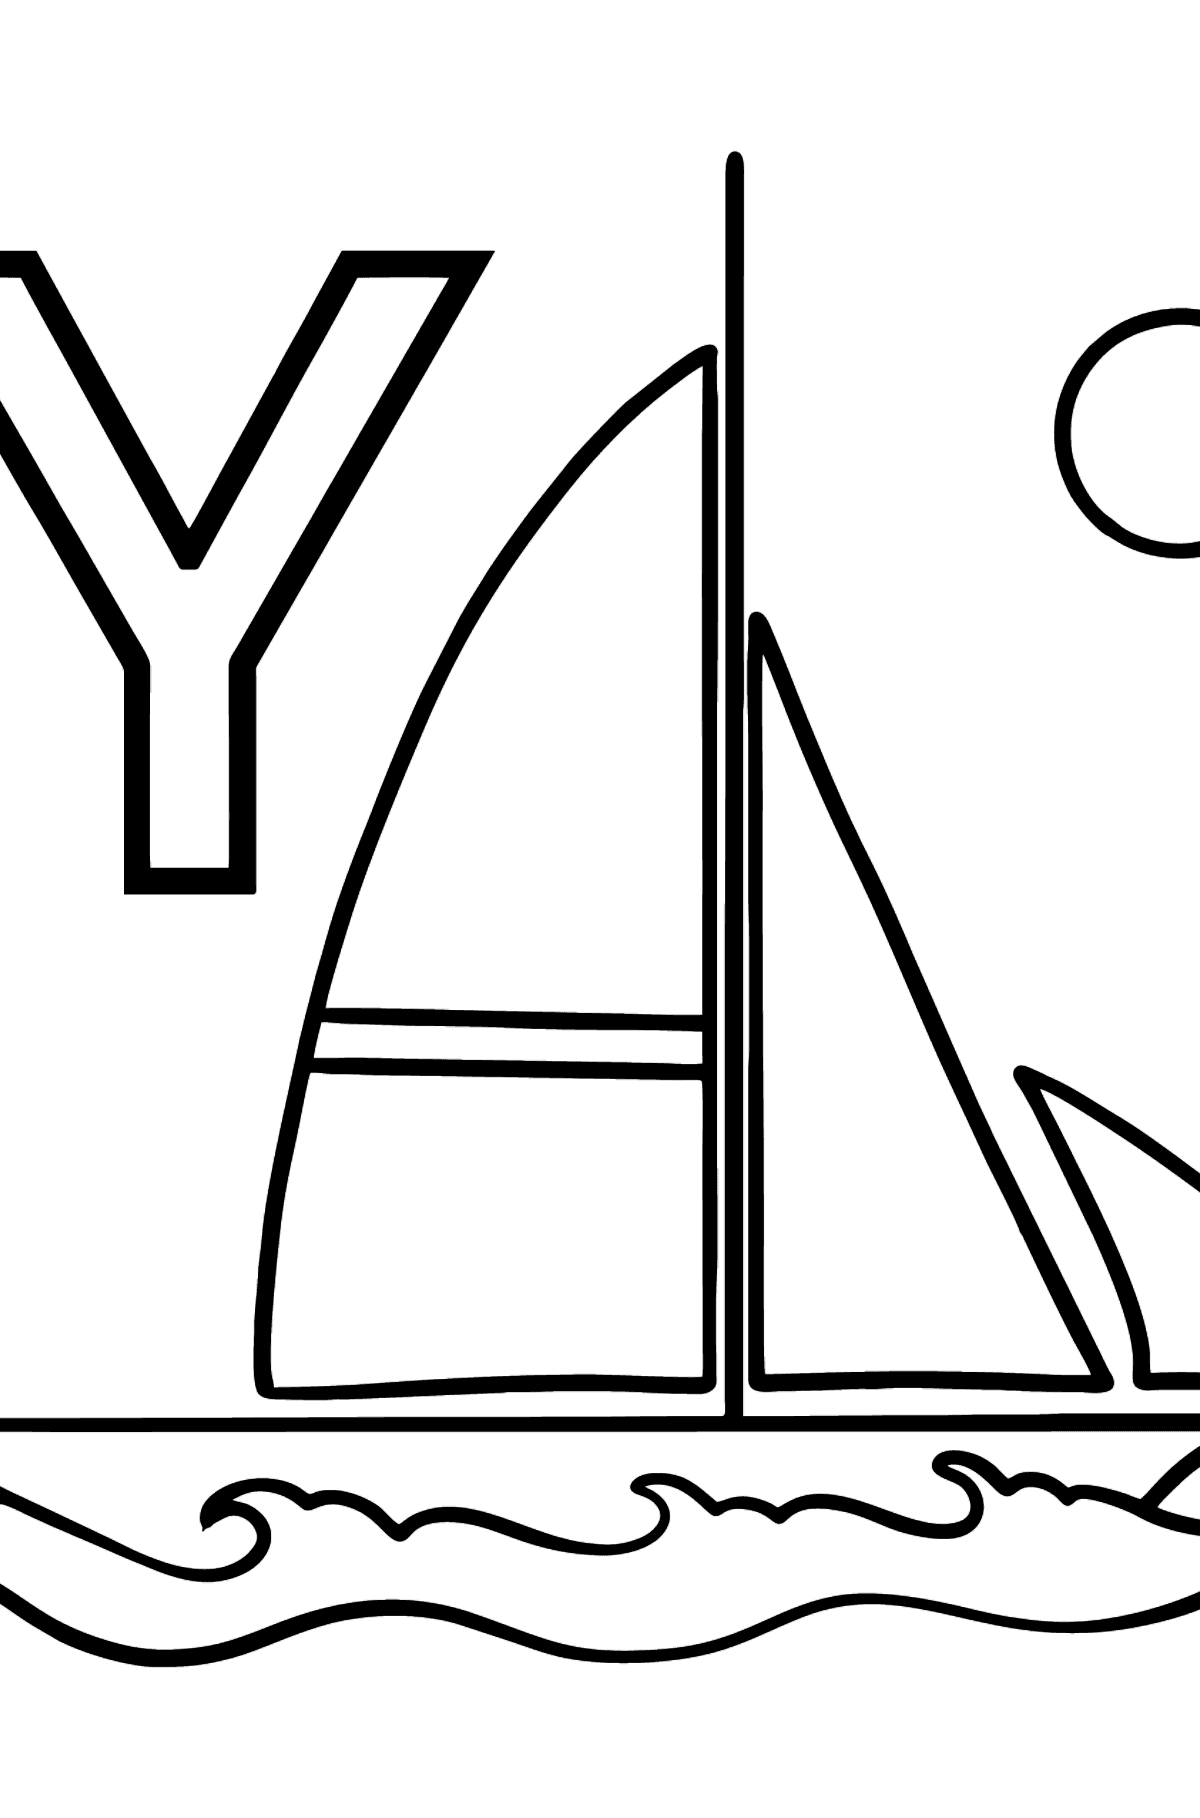 Spanish Letter Y coloring pages - YATE - Coloring Pages for Kids